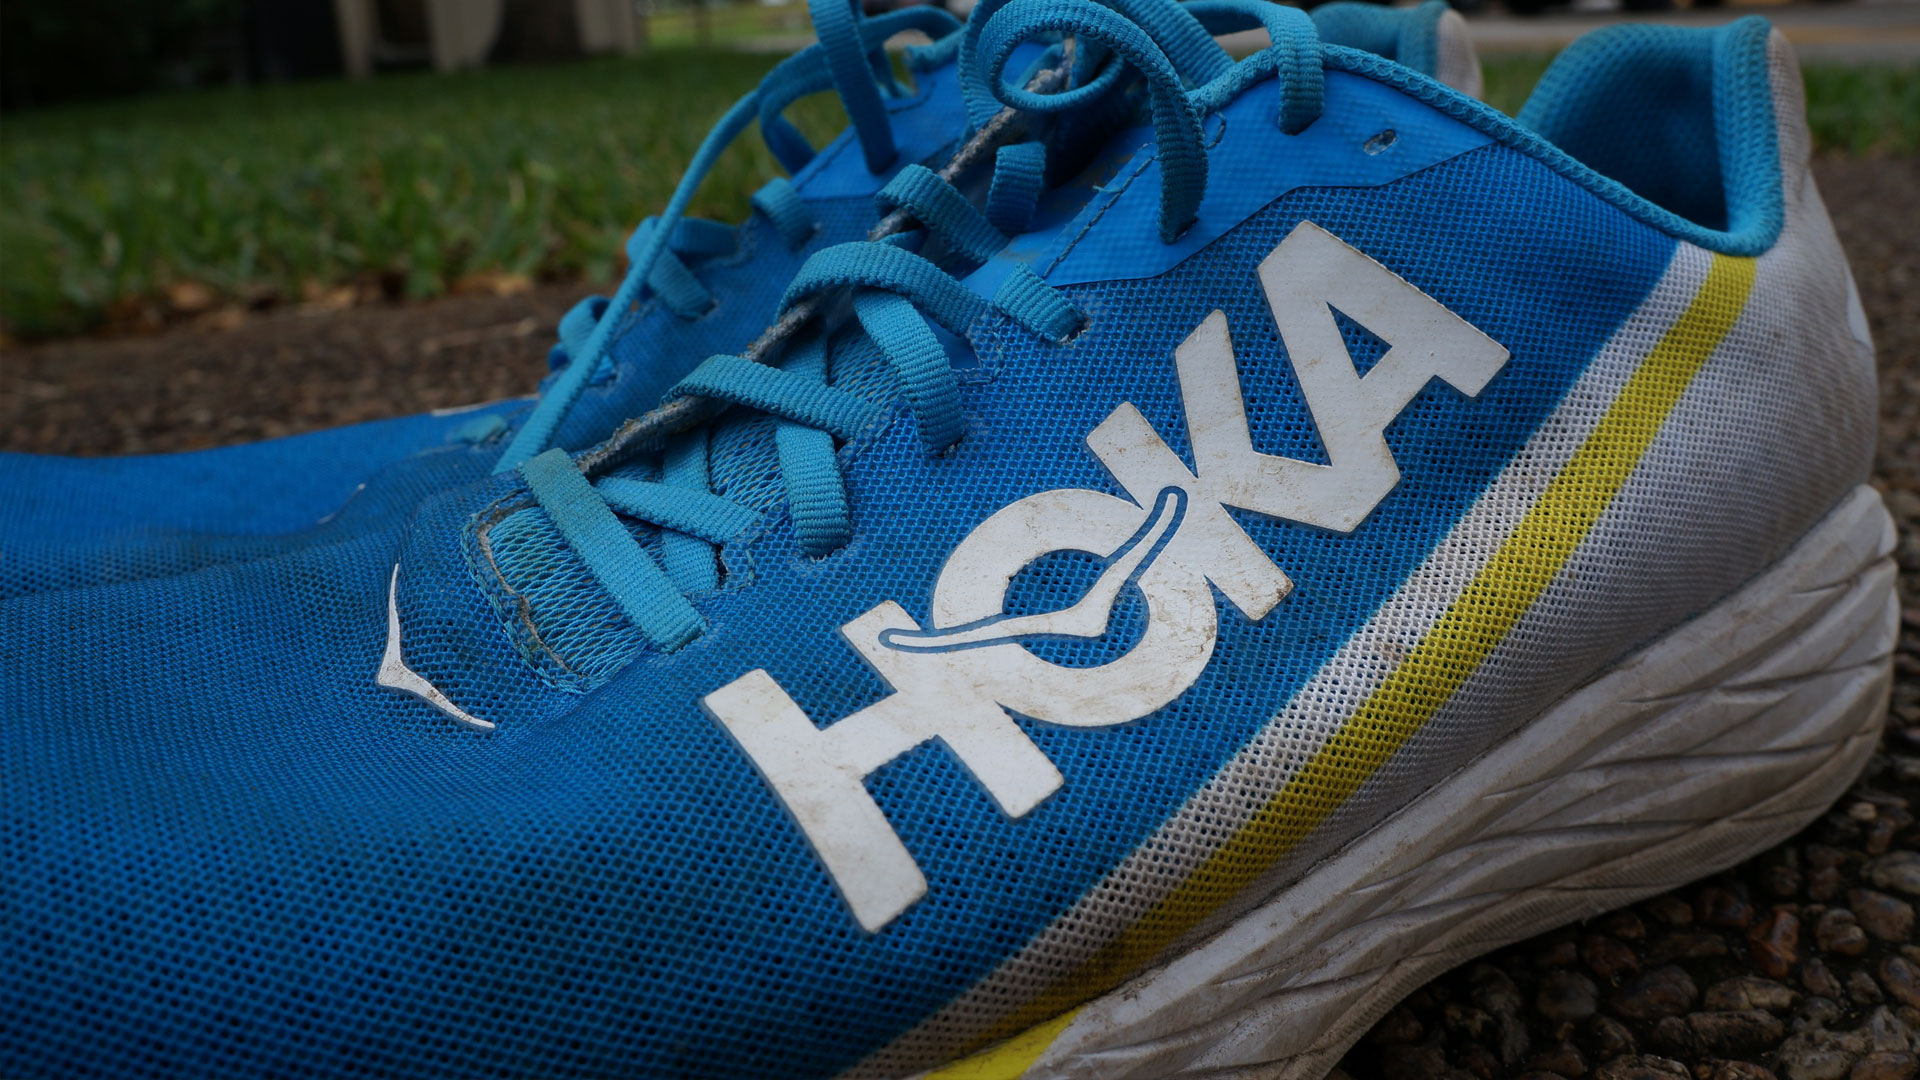 Hoka One One Rocket X review | Fit&Well